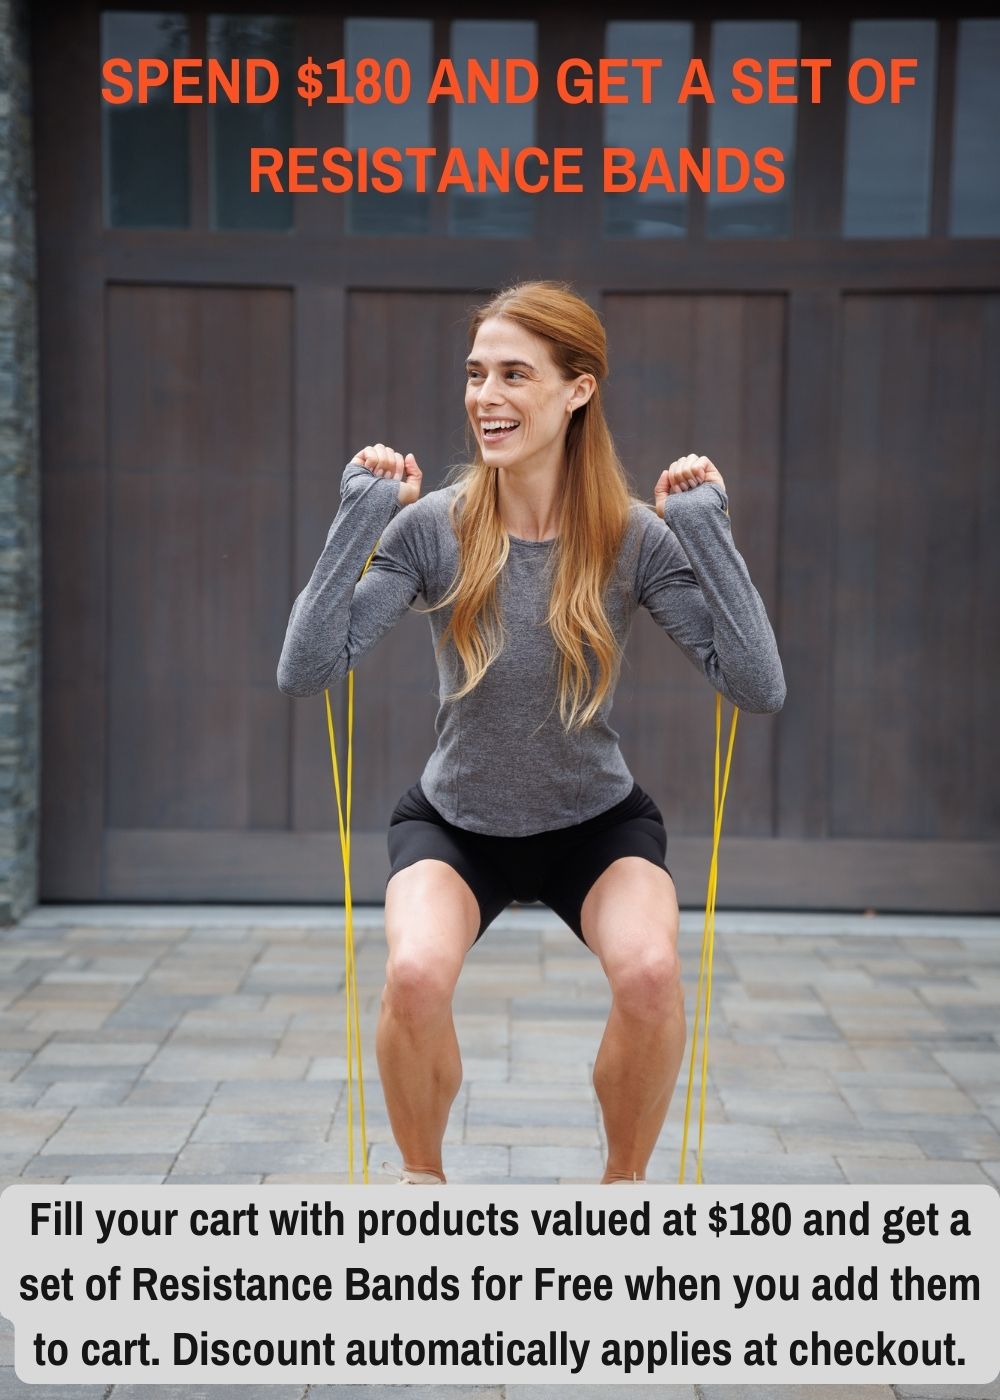 6 Resistance Band Stretching and Mobility Exercises - SET FOR SET